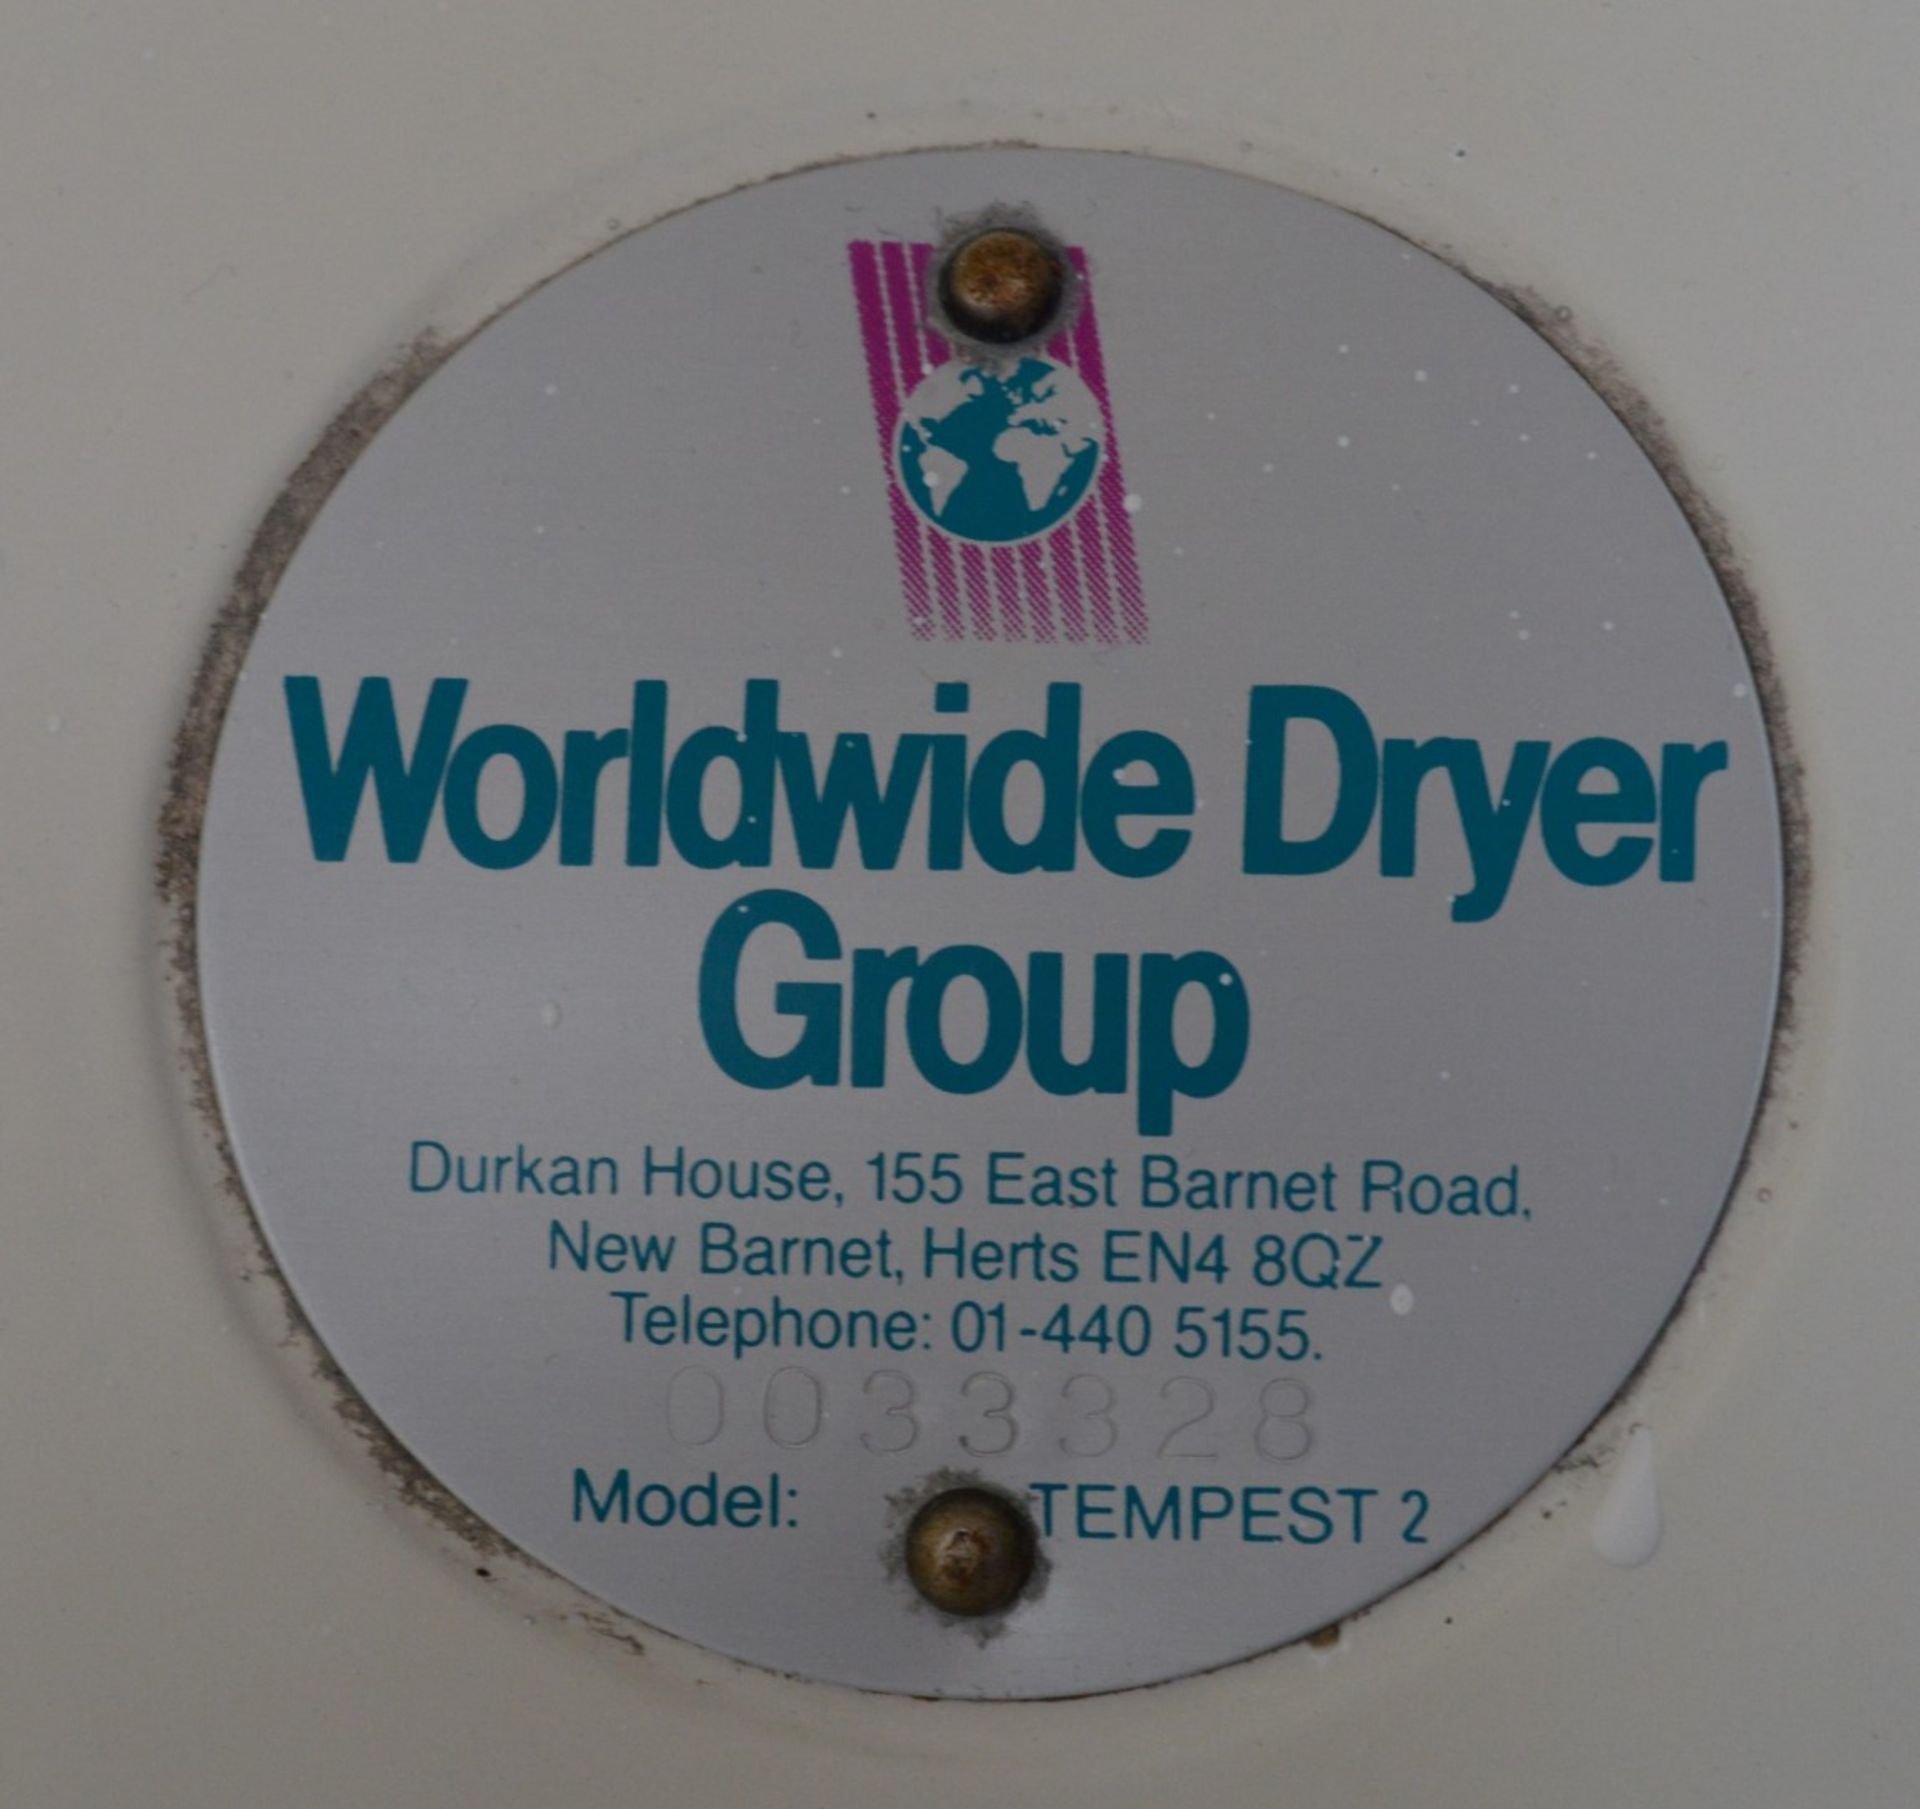 1 x Vintage Worldwide Dryer Group Electric Hand Dryer - Model Tempest 2 - 30 x 25 cms - Ref 376 2F - - Image 3 of 3